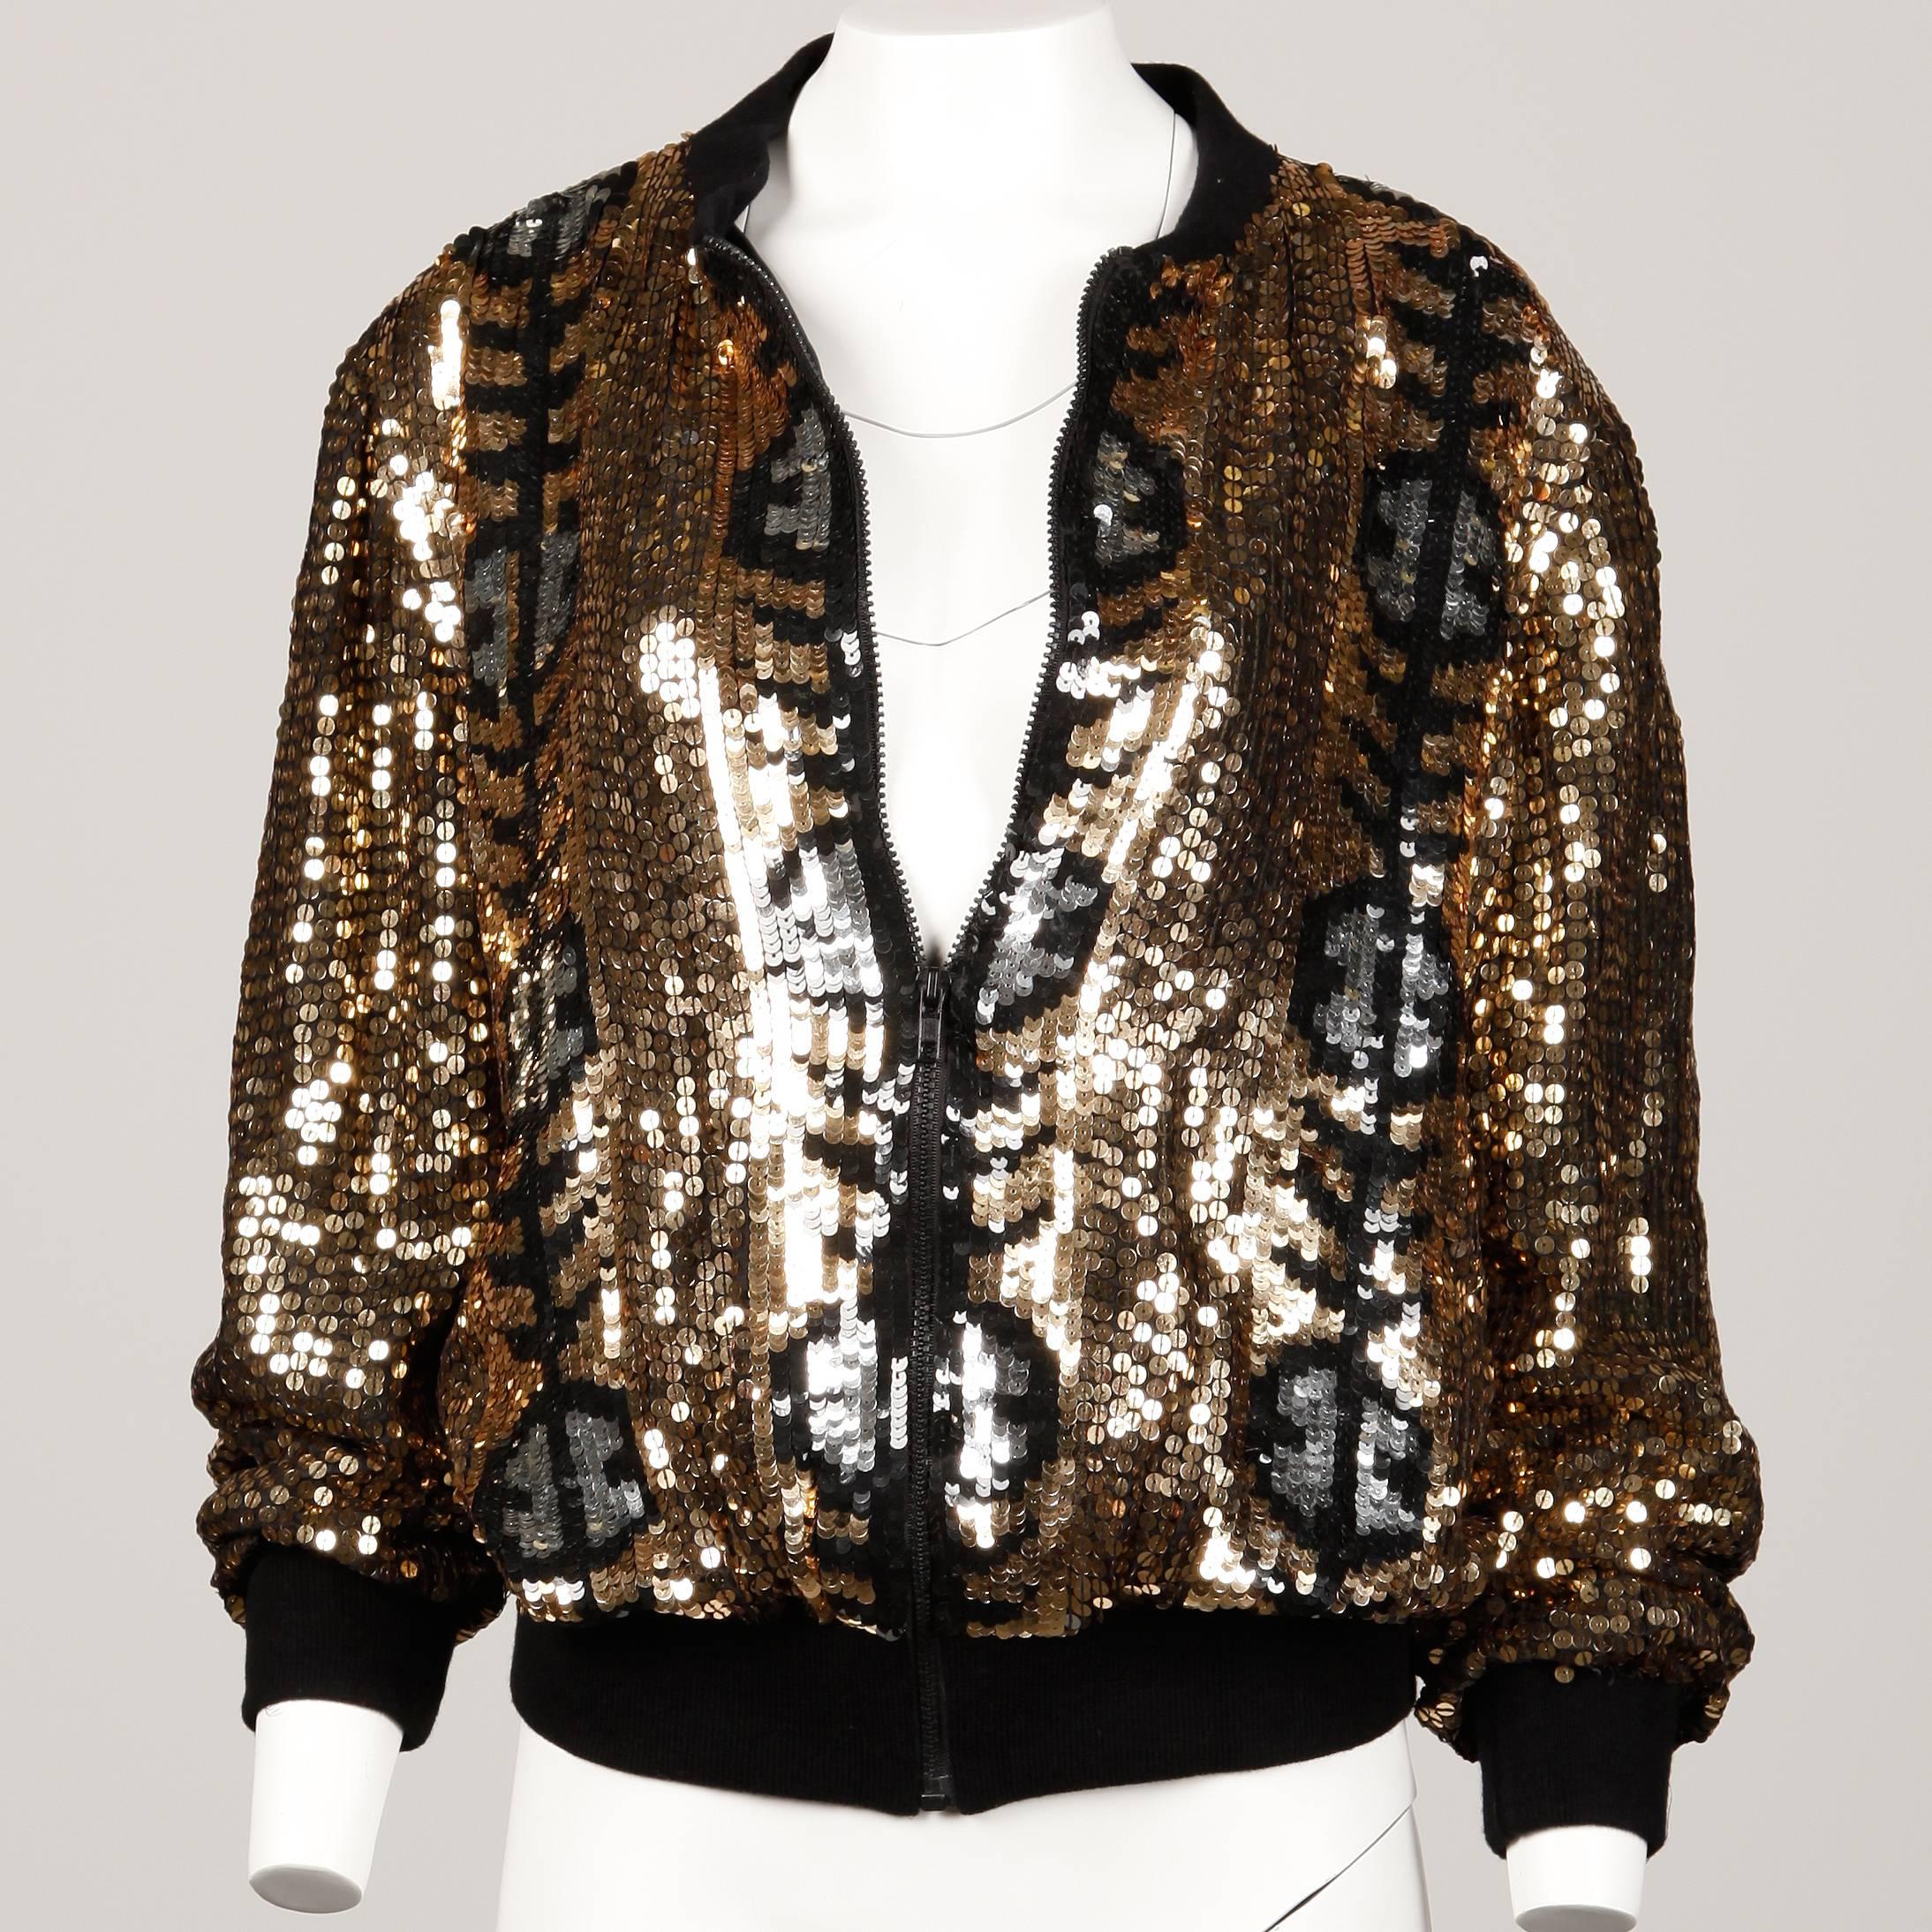 Unworn with the original store tags attached! Vintage sequin bomber jacket with ribbed cuffs and waistband and zip up front. The jacket is 100% silk with polyester lining. The marked size is a large but the jacket should fit sizes small-medium as